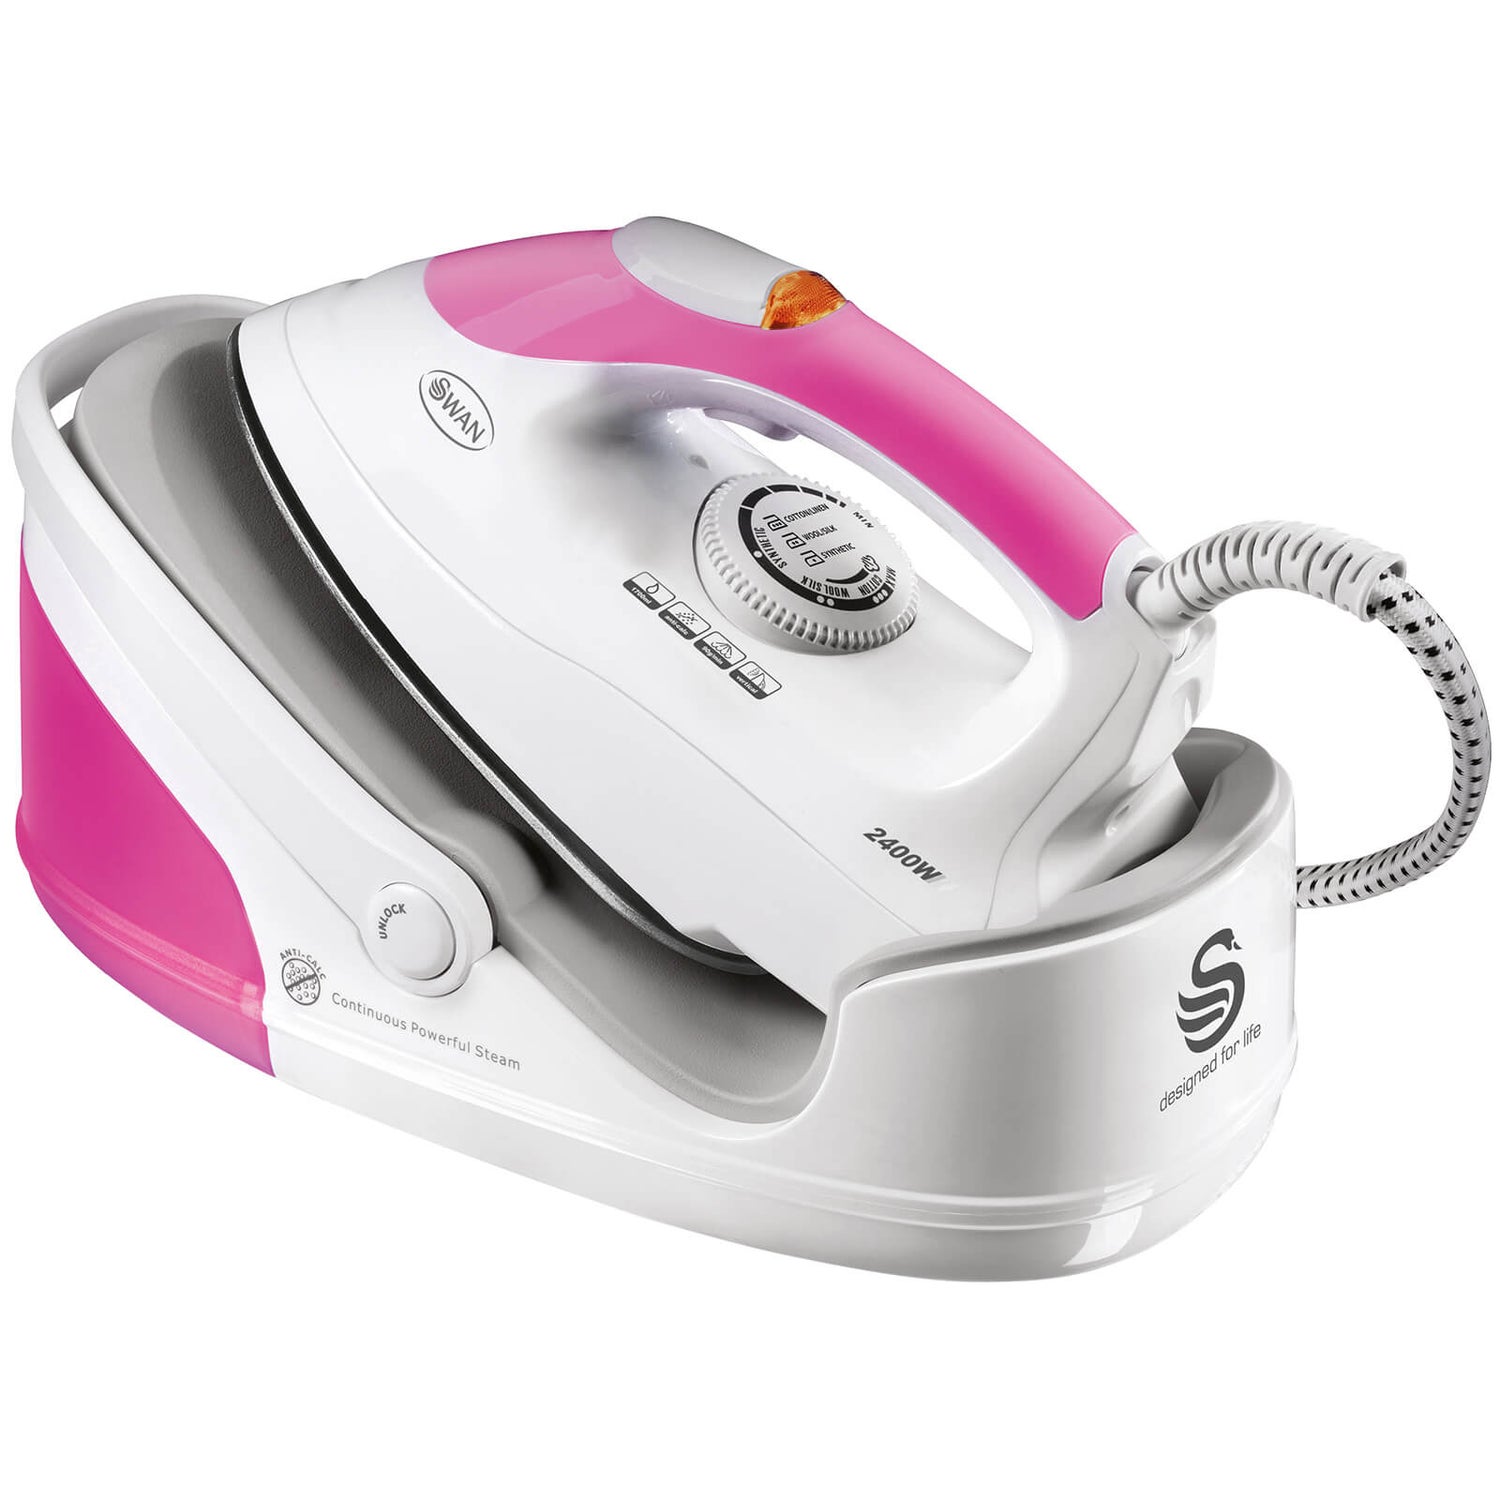 Steam generator irons review фото 88